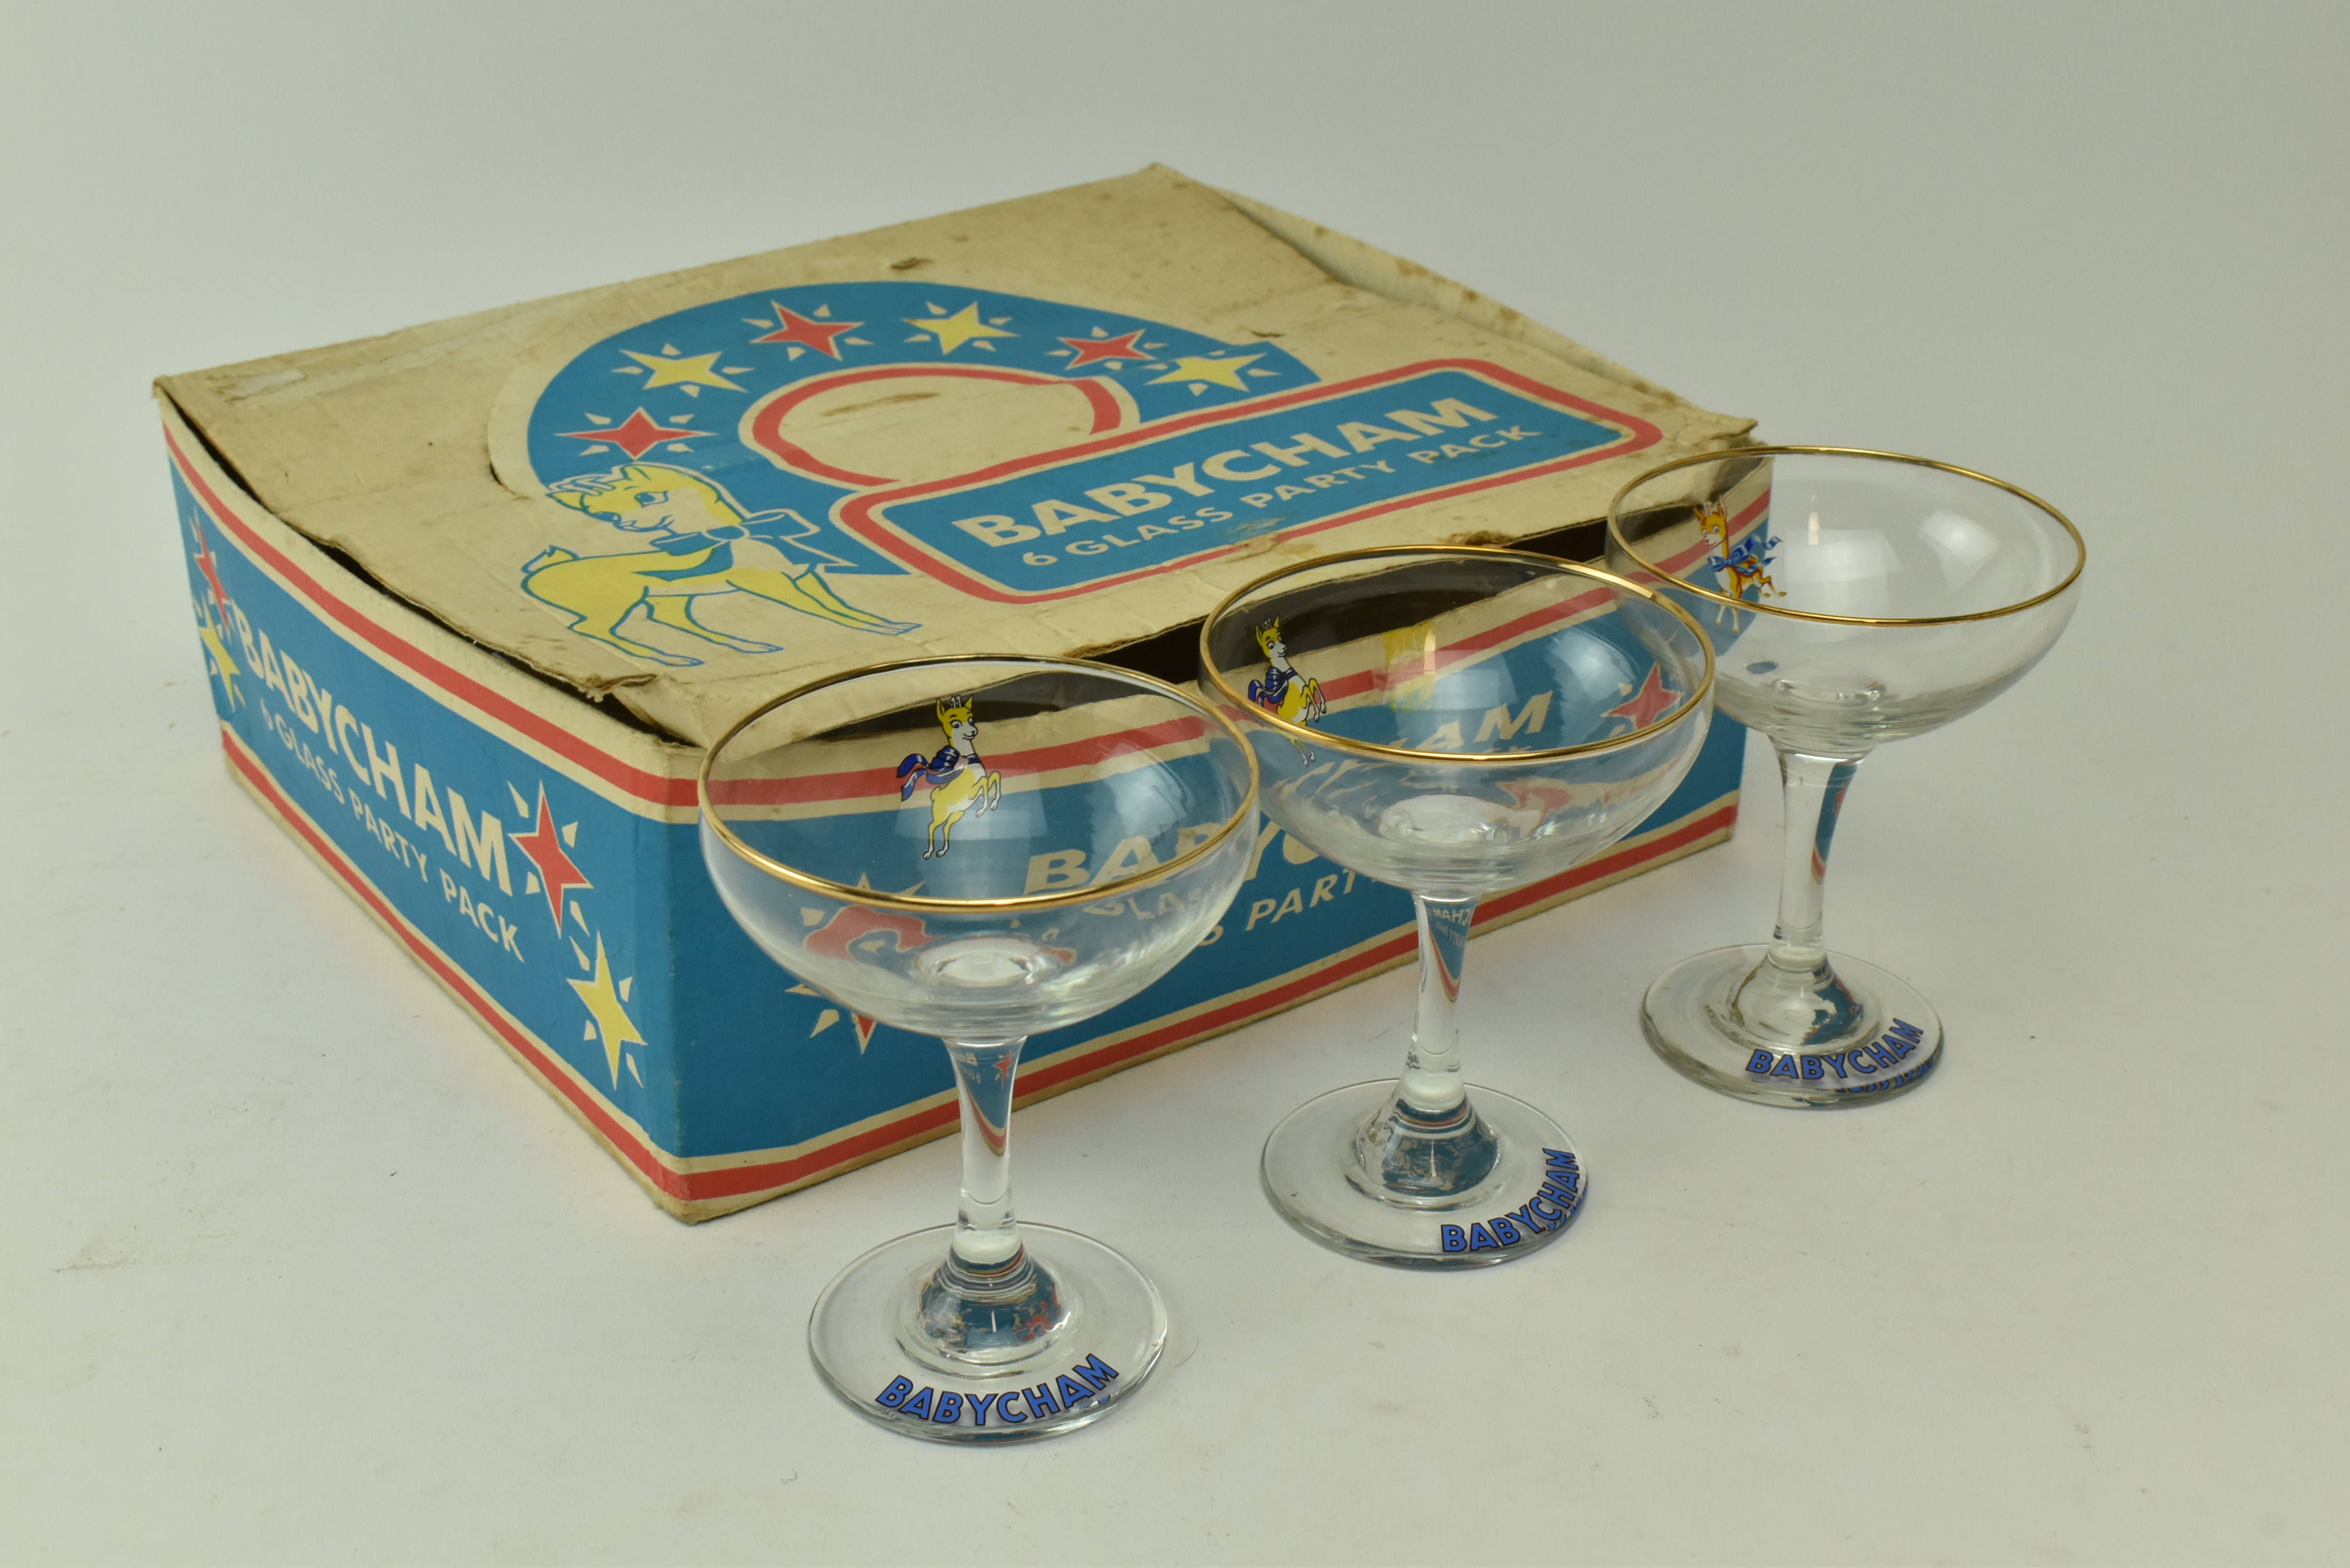 BABYCHAM - COLLECTION OF NINE VINTAGE CHAMPAGNE COUPES